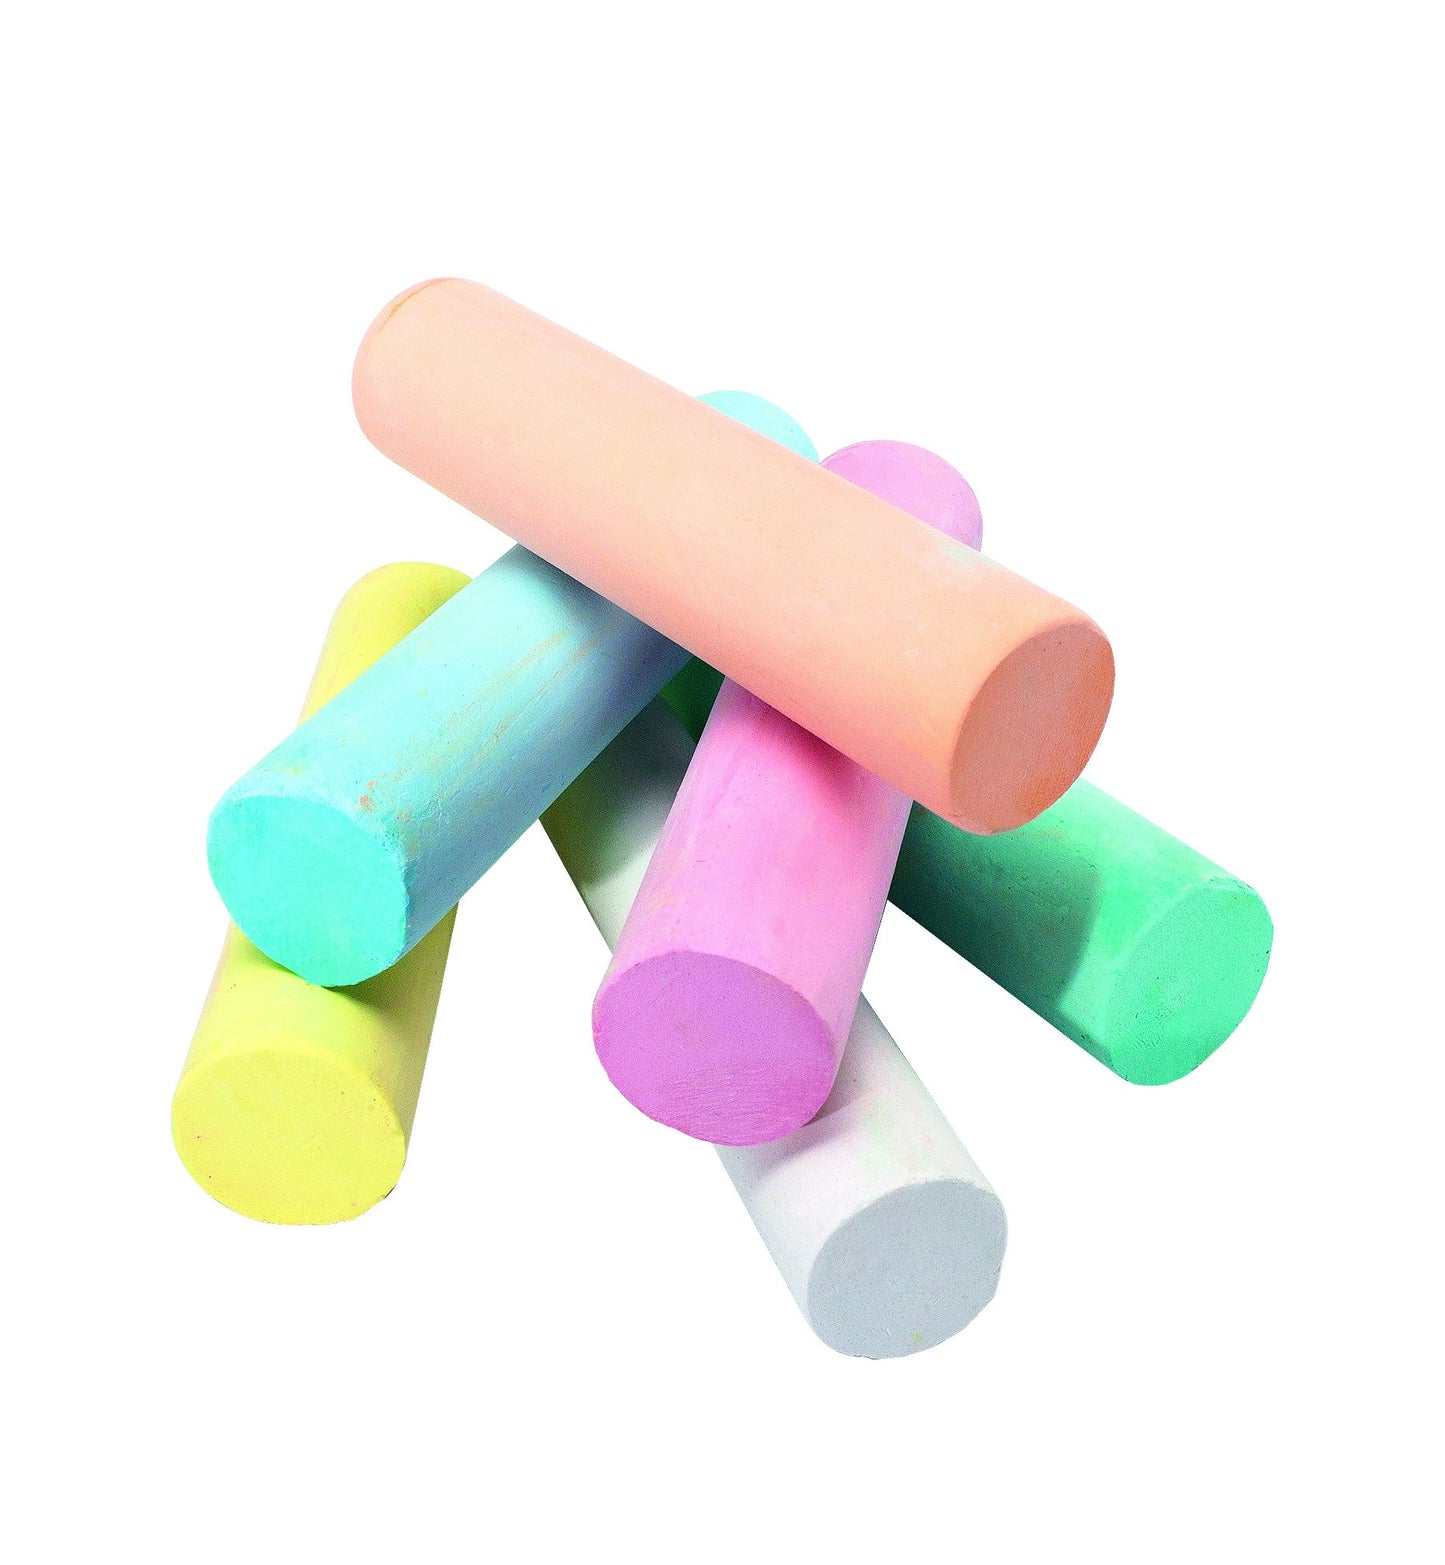 GIOTTO be-bè Street Chalks Set for Young Children, Box of 6 Assorted Colours, Super-Washable, Ideal for Home and Schools